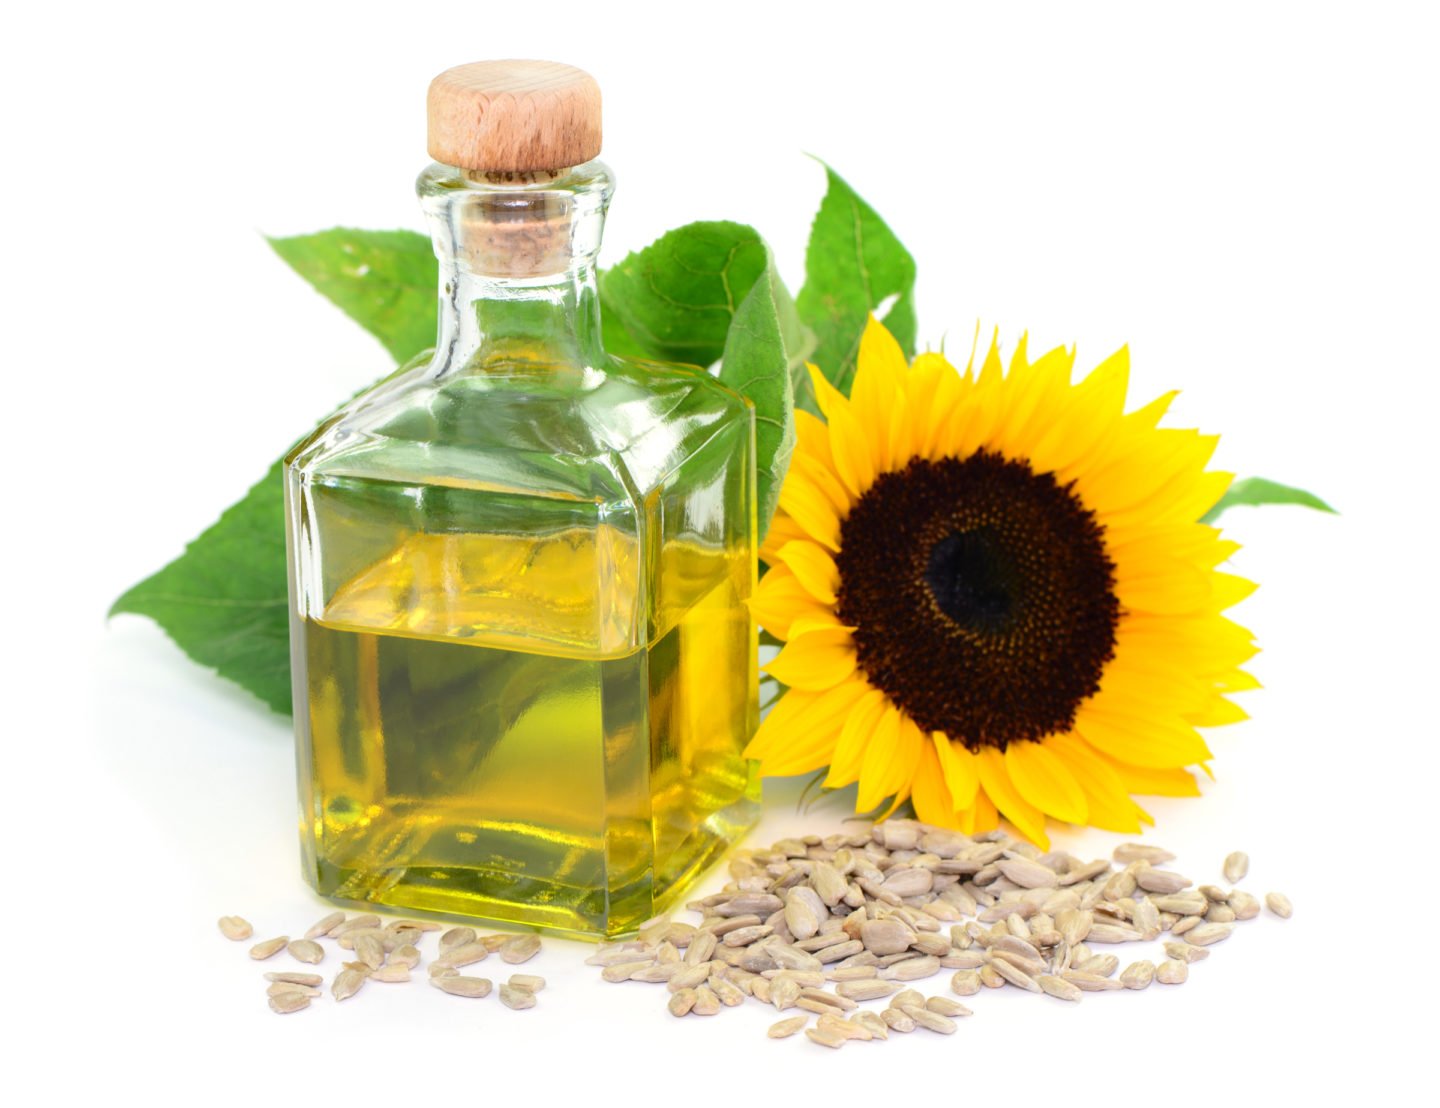 sunflower oil pictured with seeds and flower